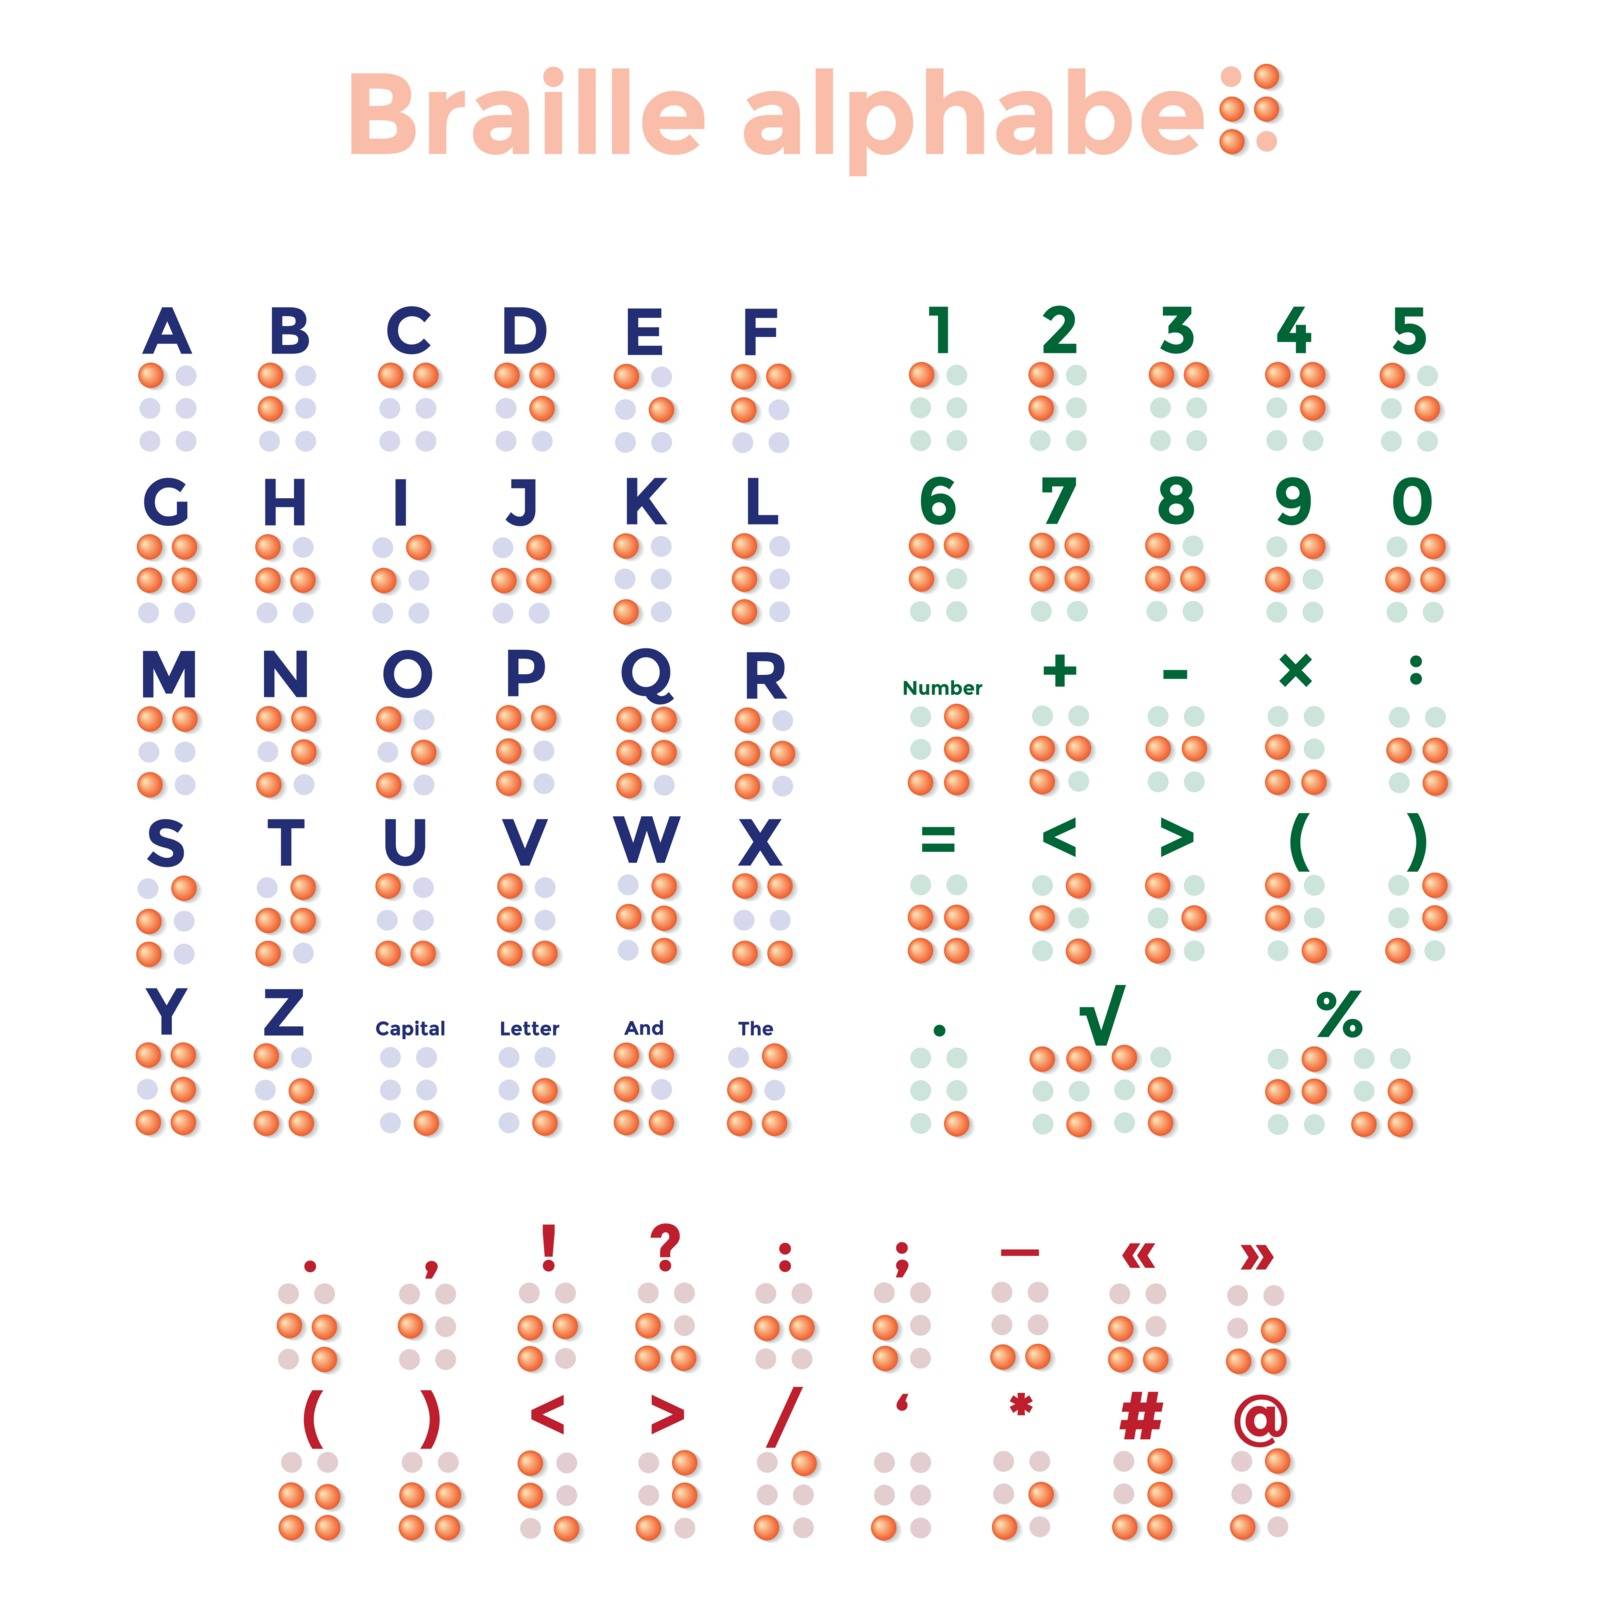 Braille alphabet, punctuation and numbers. Vector illustration.